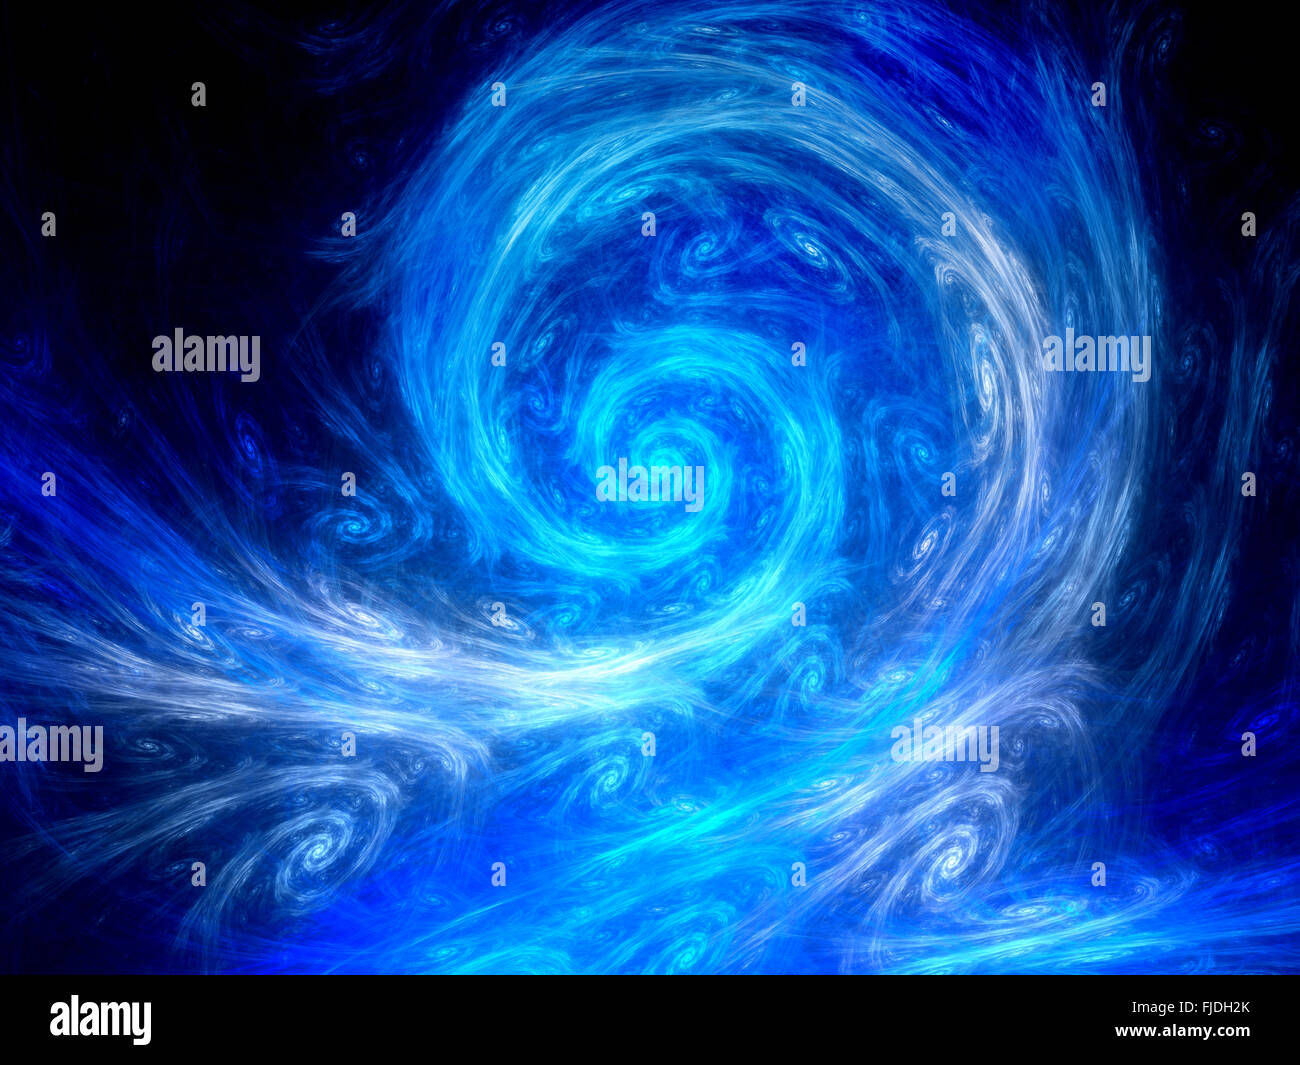 Blue glowing spiral cyclones artwork, computer generated abstract background Stock Photo